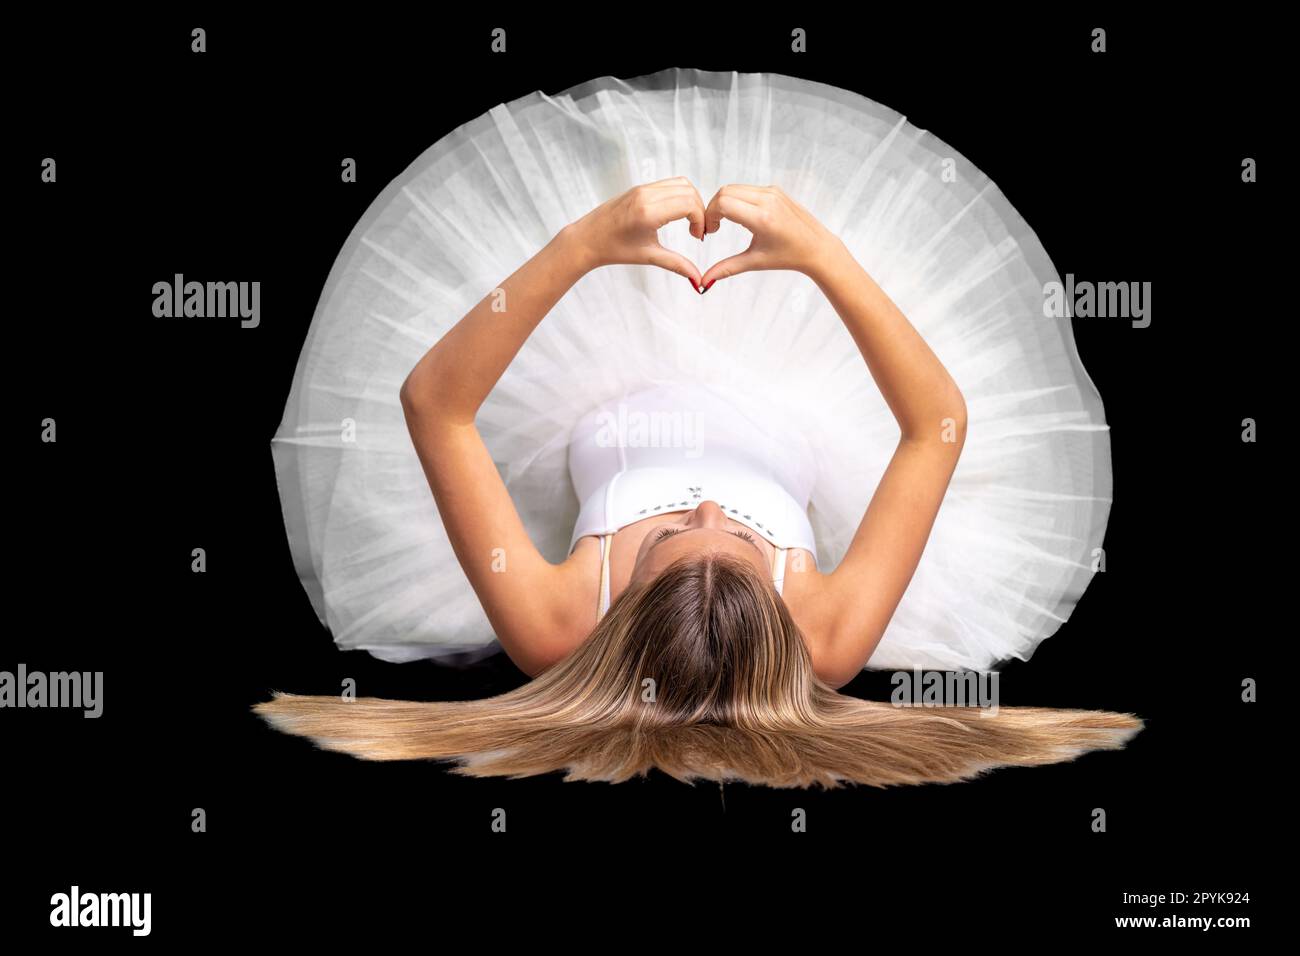 ballerina in a white dress lies on the ground and shows a heart with her hands, portrait on a black background Stock Photo